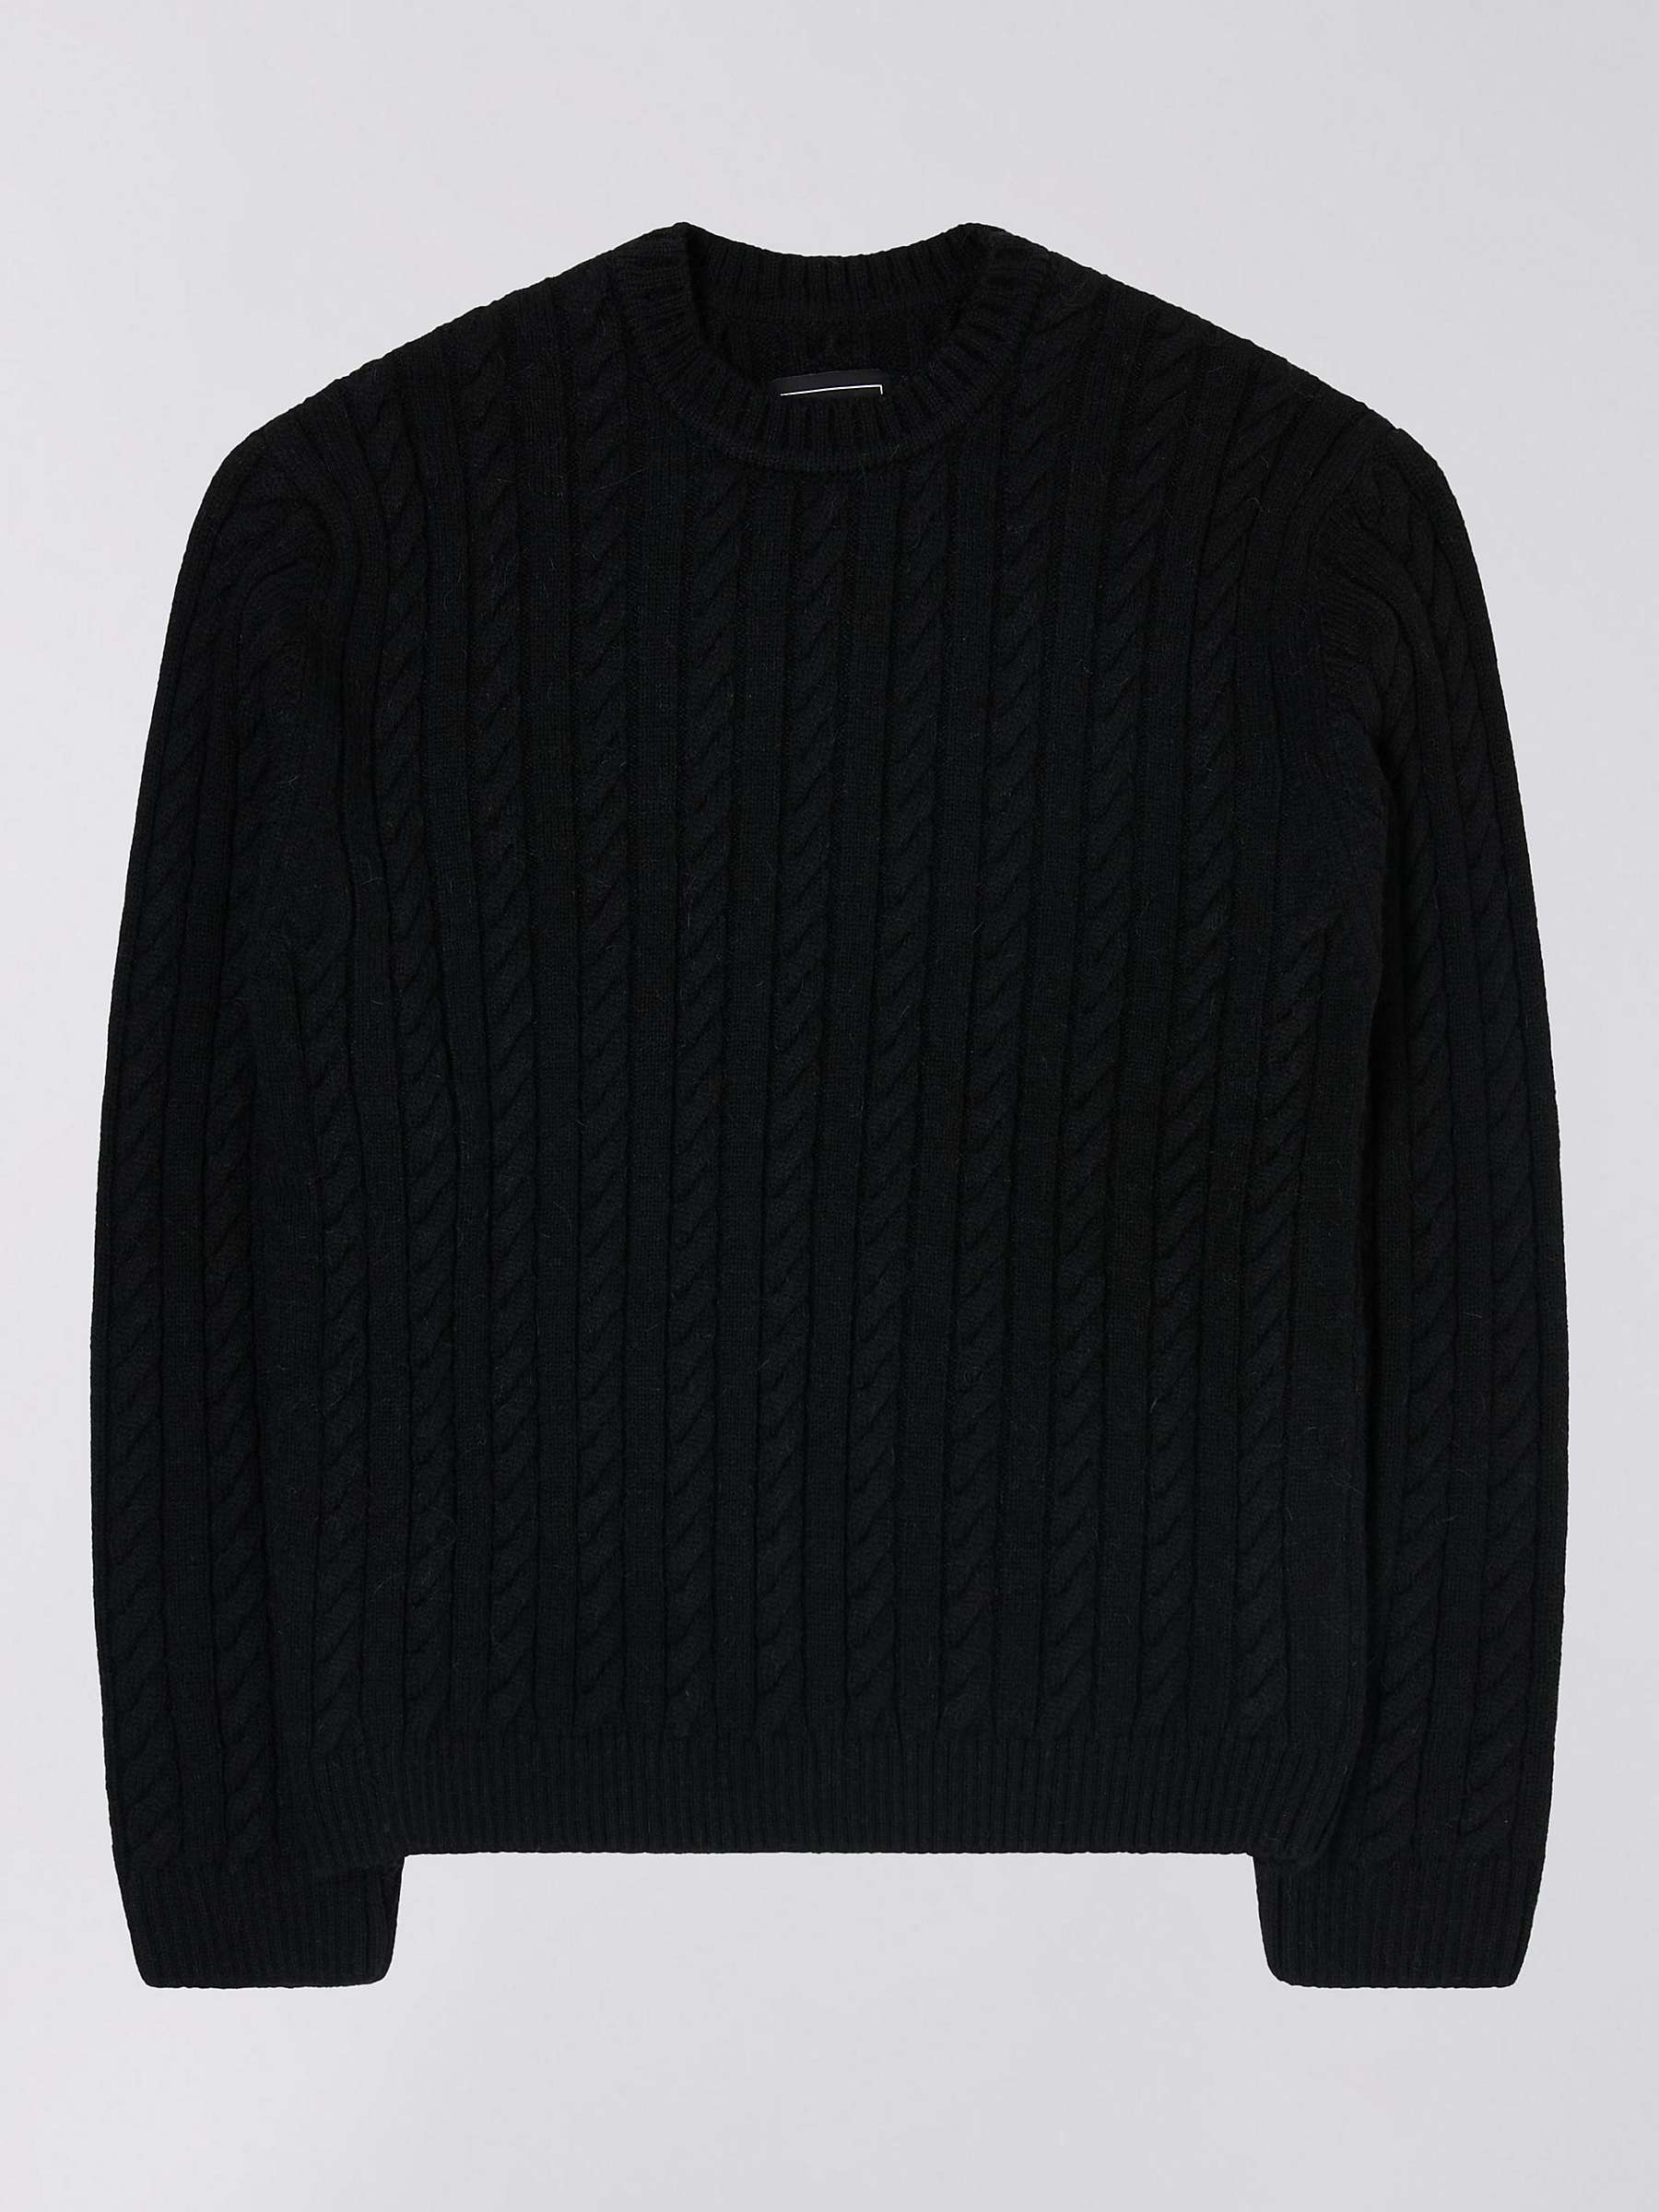 Edwin Twisted Crew Neck Pullover Knitted Jumper, Black at John Lewis ...